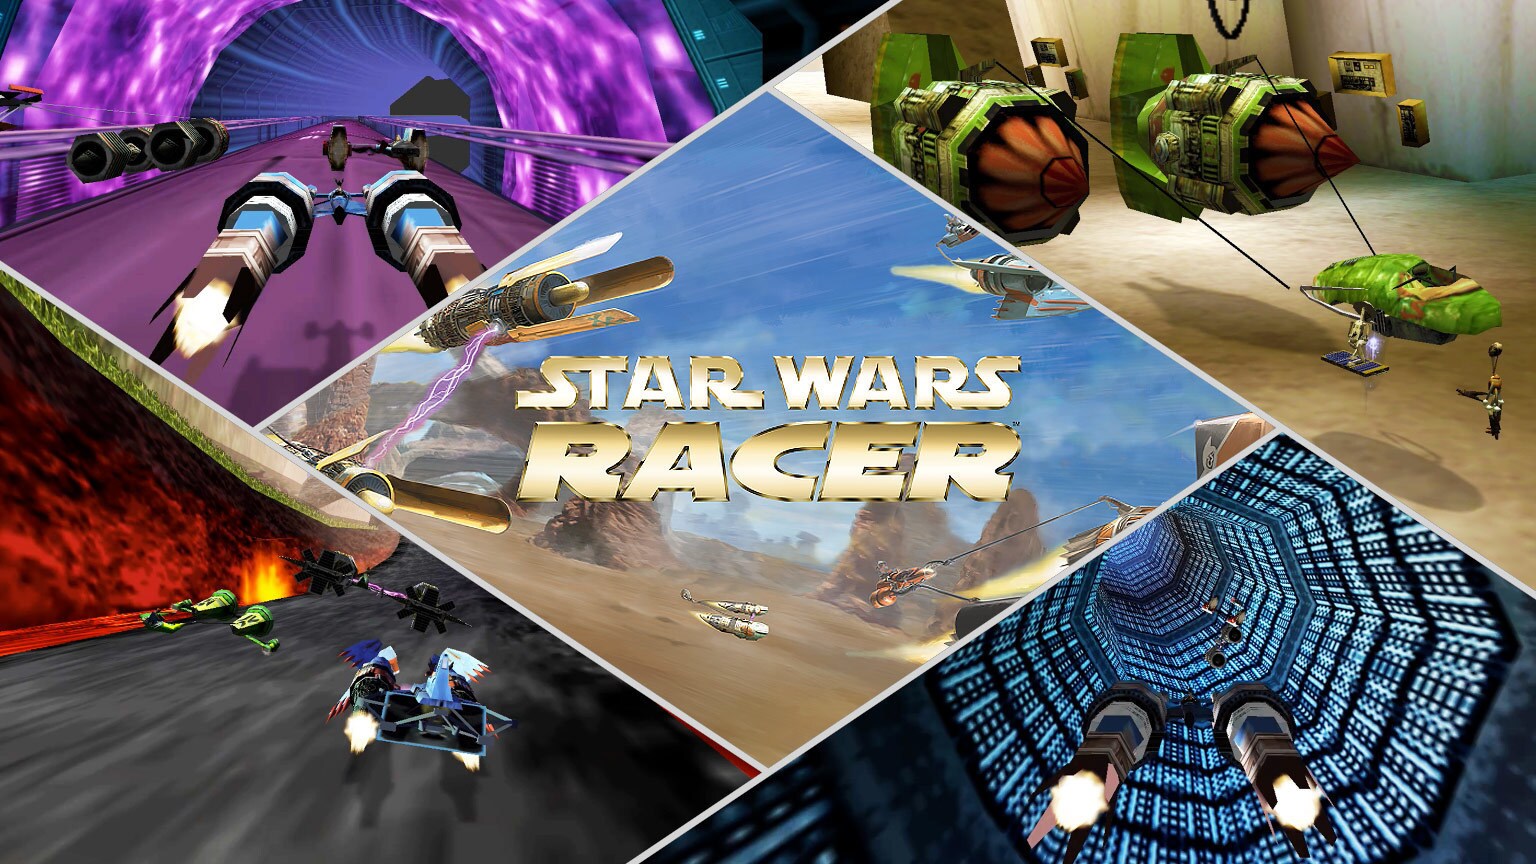 Over 20 Years After Its Debut, the Force - and Fandom - is Still Strong with Star Wars Episode I: Racer